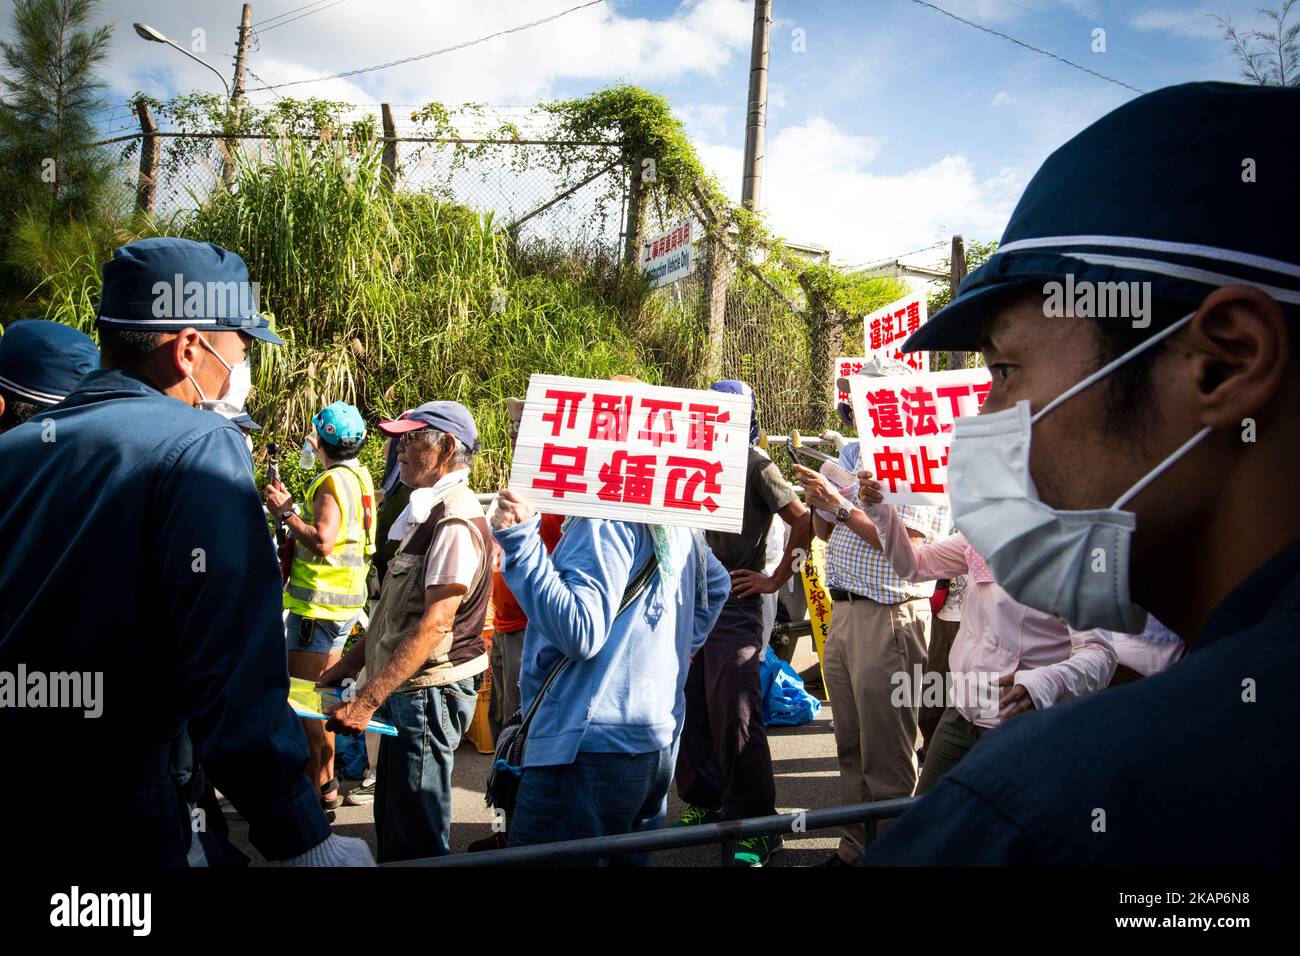 Anti-US base protesters were guarded by riot police as they try to block construction trucks in front of the Camp Schwab gate to protest against the construction of the new U.S Marine base on July 13, 2017 in Henoko, Nago, Okinawa prefecture, Japan. Around 52 construction vehicles loaded with stones and heavy equipment entered the US Marine base today to continue constructing the new US Marine Base. Over the next five years, a new facility will be built in the waters off the coast from Camp Schwab as part of the relocation of the Futenma Air Station to the Henoko area on the island of Okinawa. Stock Photo